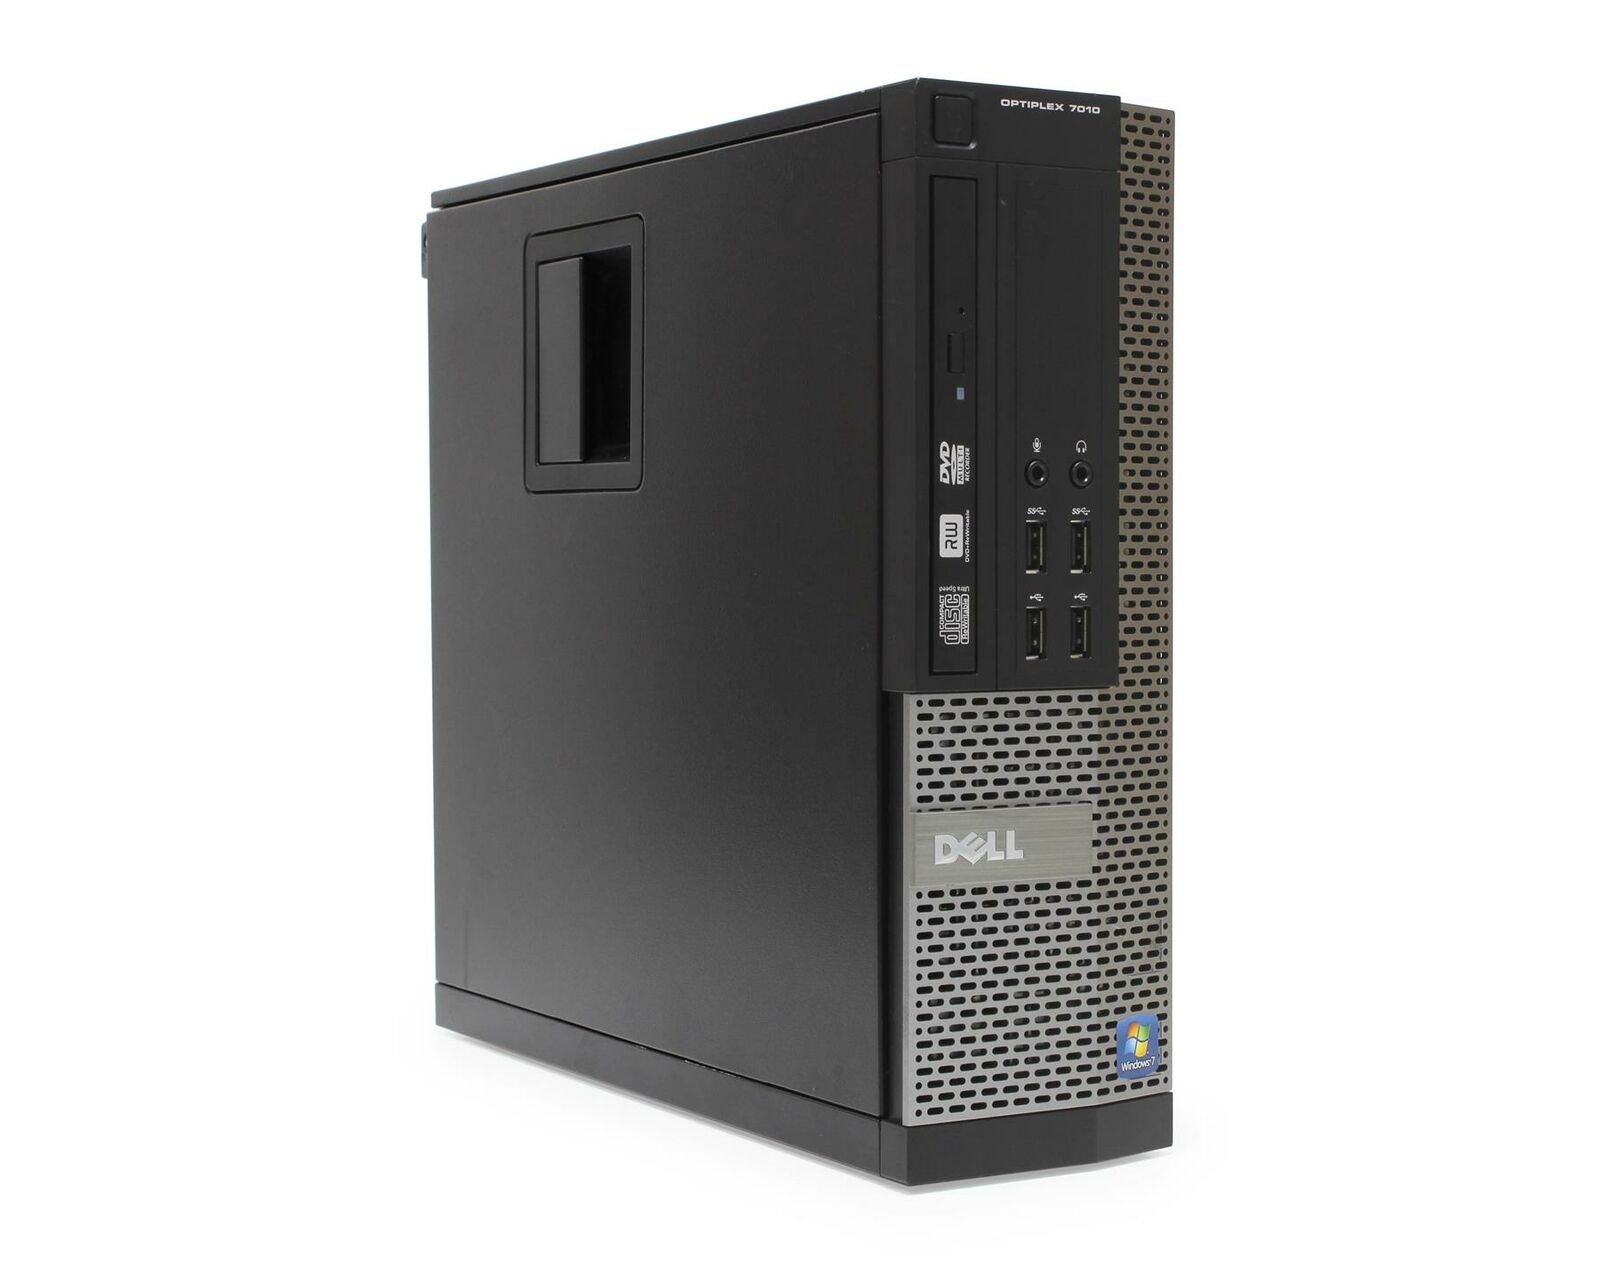 Black and sleek CPU with the logo of Dell on the front side and Windows on the bottom front side